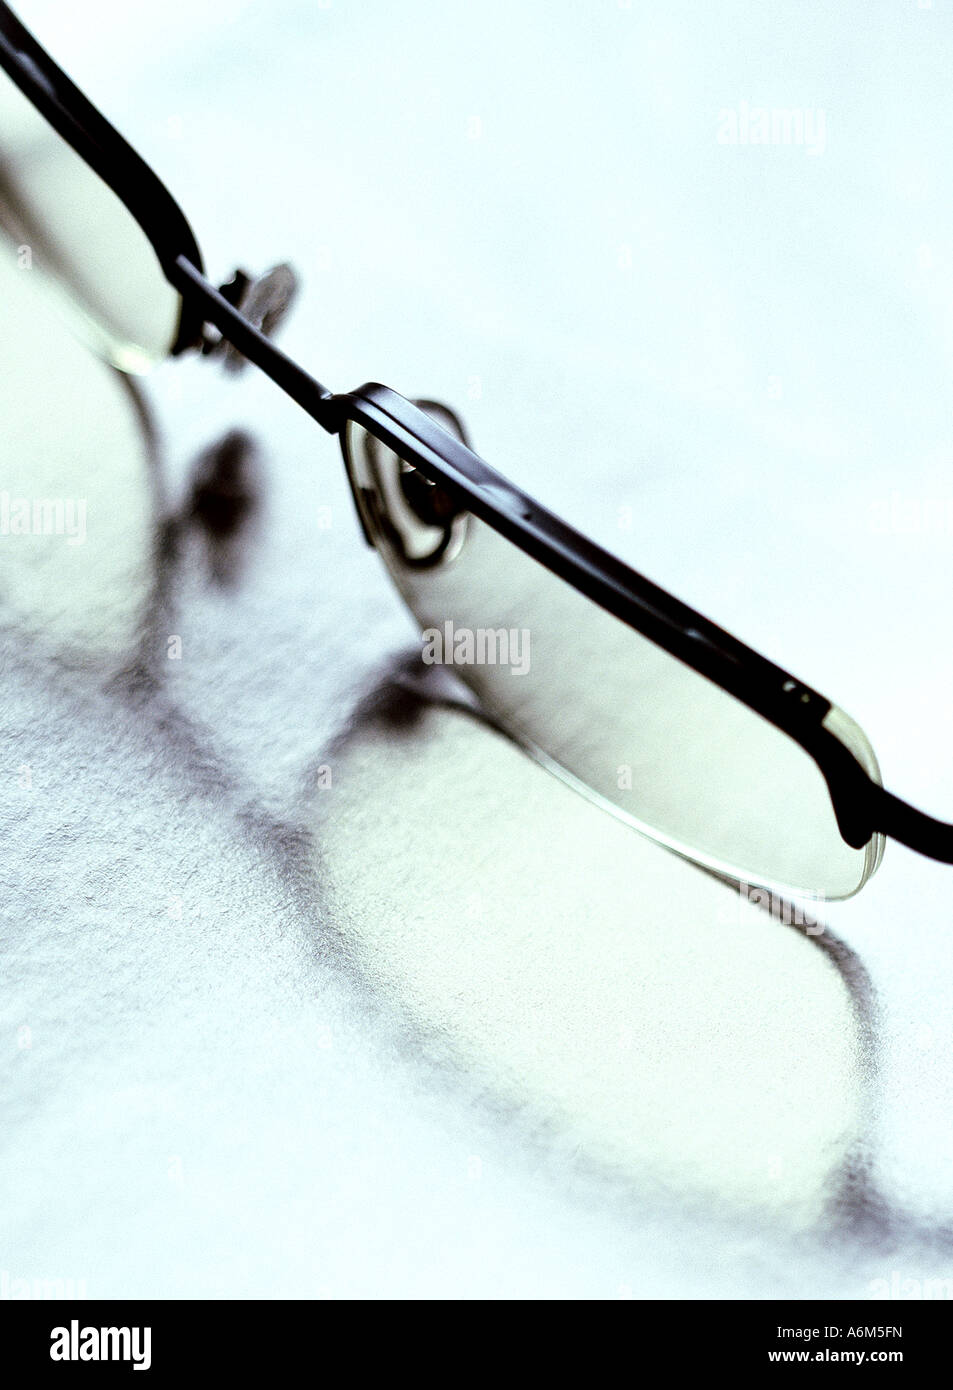 Pair of spectacles close up Stock Photo